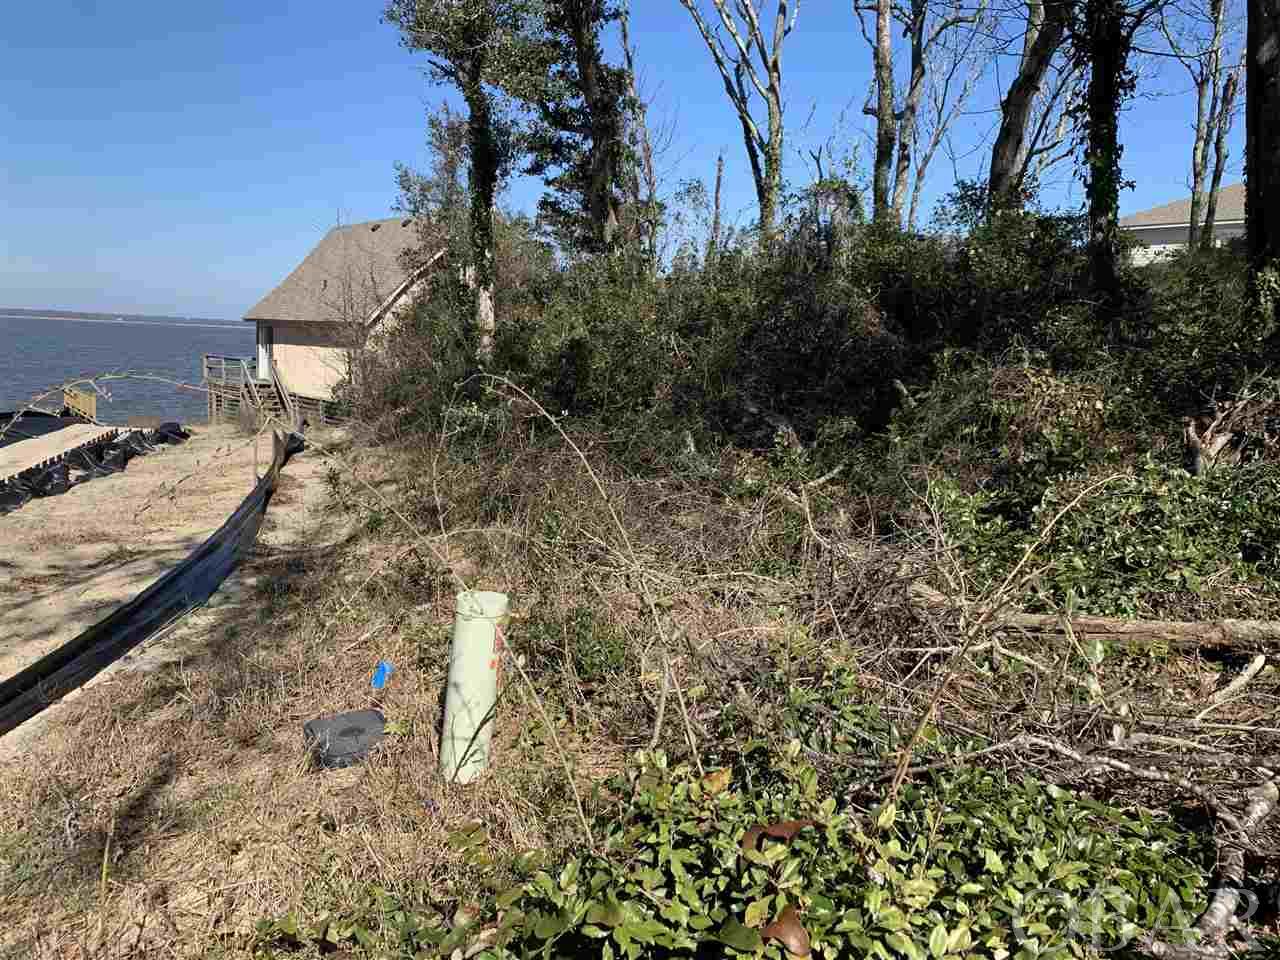 PRICE REDUCED!!!!  Enjoy spectacular water views overlooking the scenic and lovely Kitty Hawk Bay!  Outstanding WATERFRONT site located in the boating community of Colington Harbour!! Build your Outer Banks dream home on this elevated site and enjoy panoramic water views! And sunset views!  Situated on a quiet cul-de-sac in a very private setting just a short stroll to the community amenities! Community amenities include: Clubhouse, marina, boat ramp, sound front beach / park with swimming area, Olympic size salt-water pool & baby pool, tennis courts, gated community. *Small old structure on the property to be sold in "as is where is" condition. No access to structure is available. Bulkhead in place. no site prep needed. Owner financing may be possible for a qualified buyer.